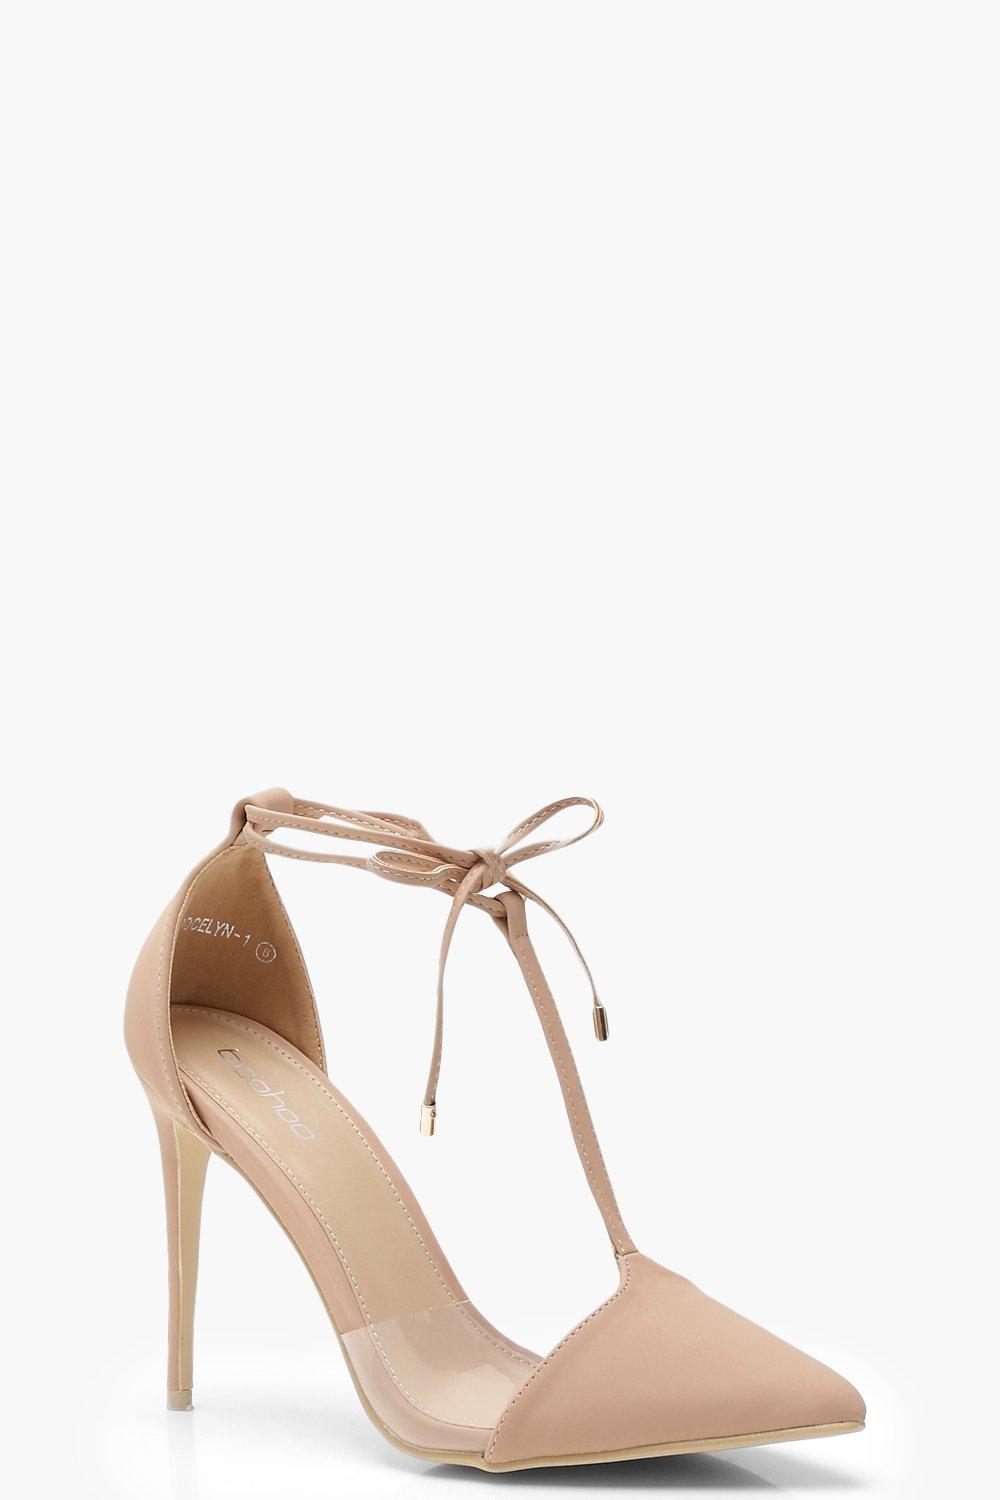 t bar pointed heels